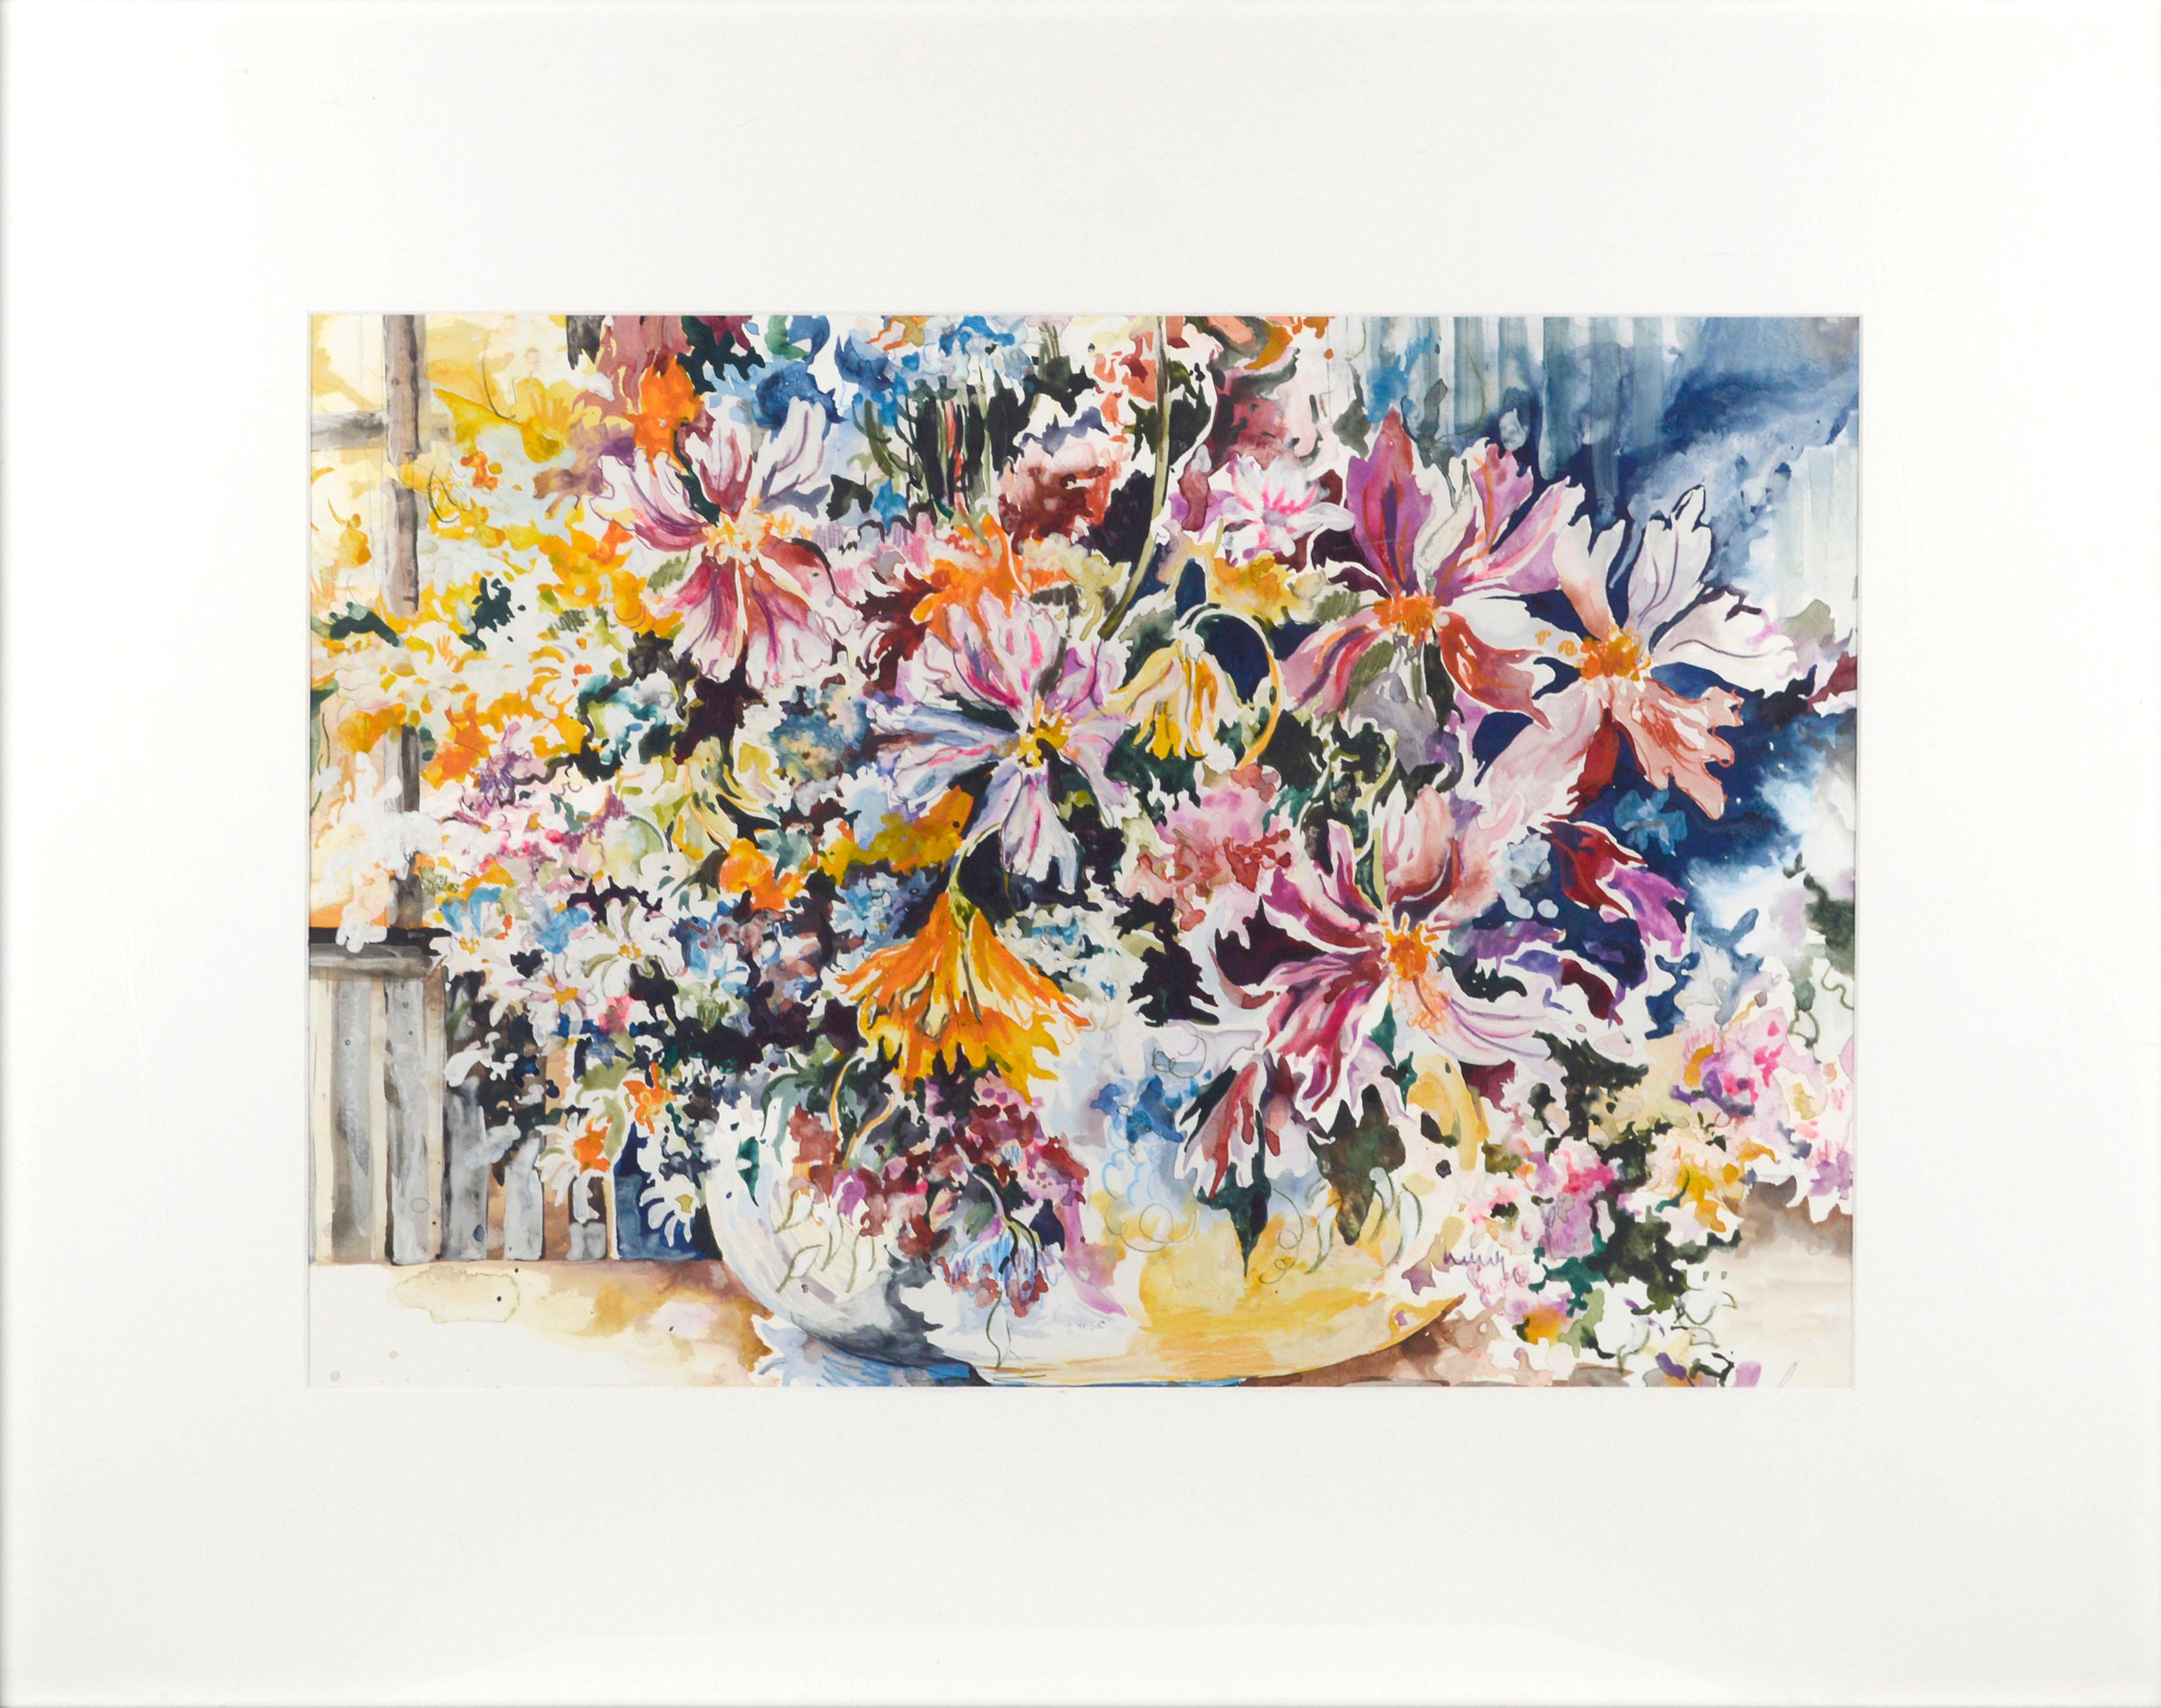 Spring Bouquet, Large-Scale Floral Watercolor Still Life  - Art by Royce Thyberg Gordon